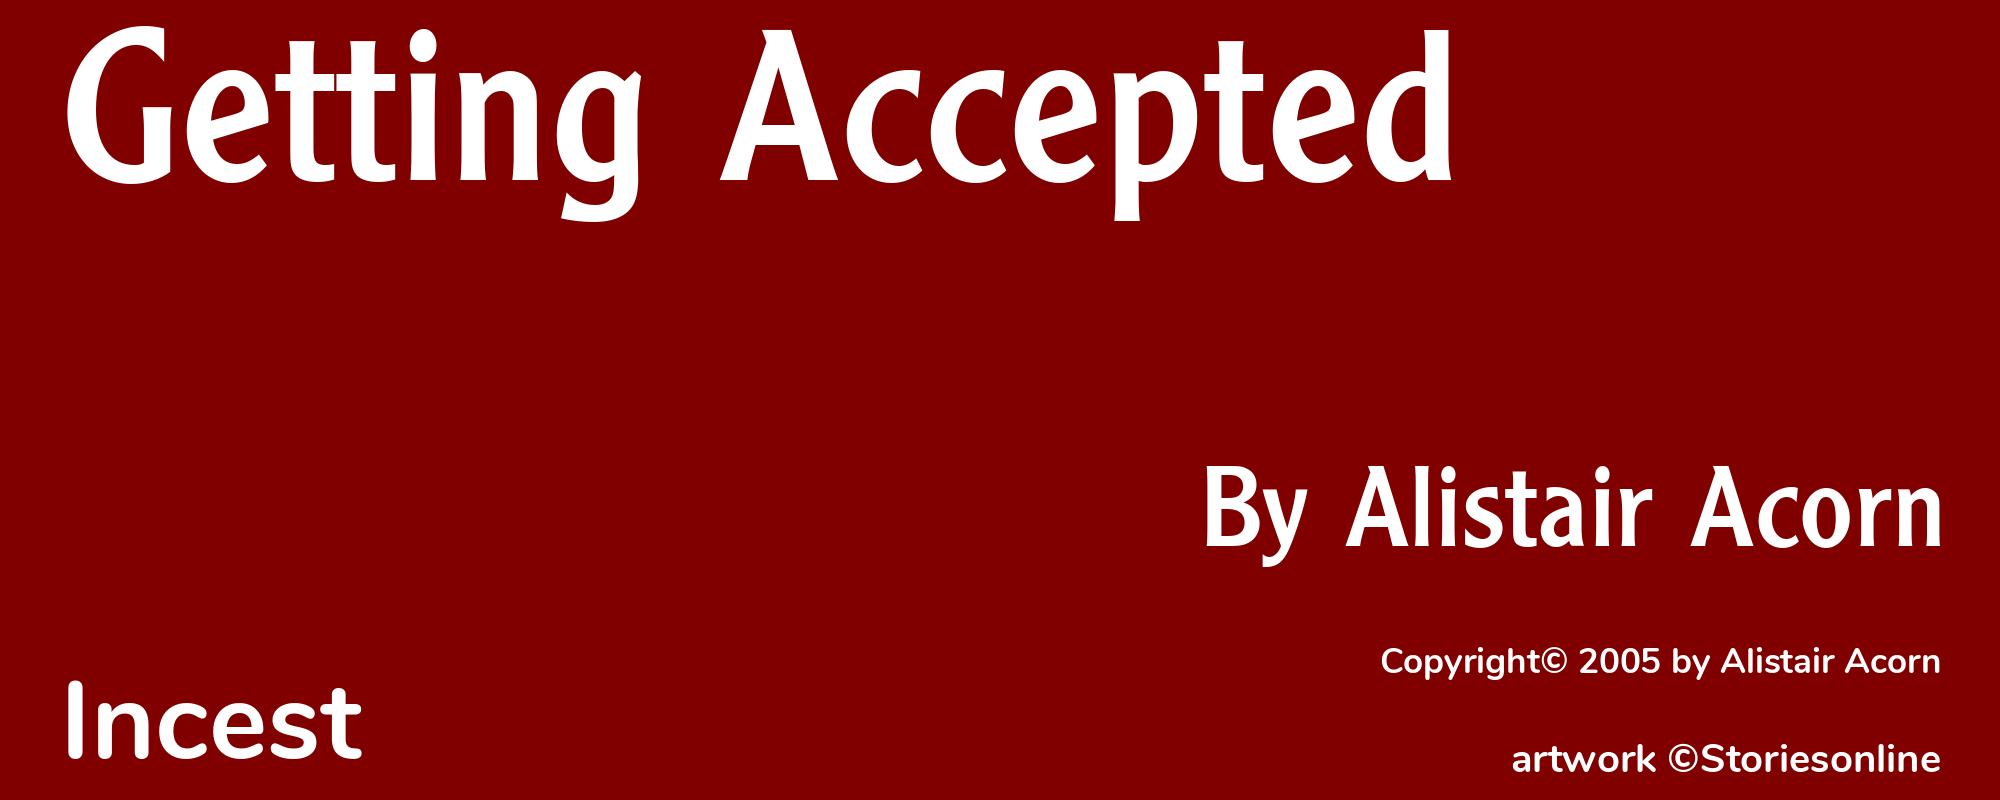 Getting Accepted - Cover